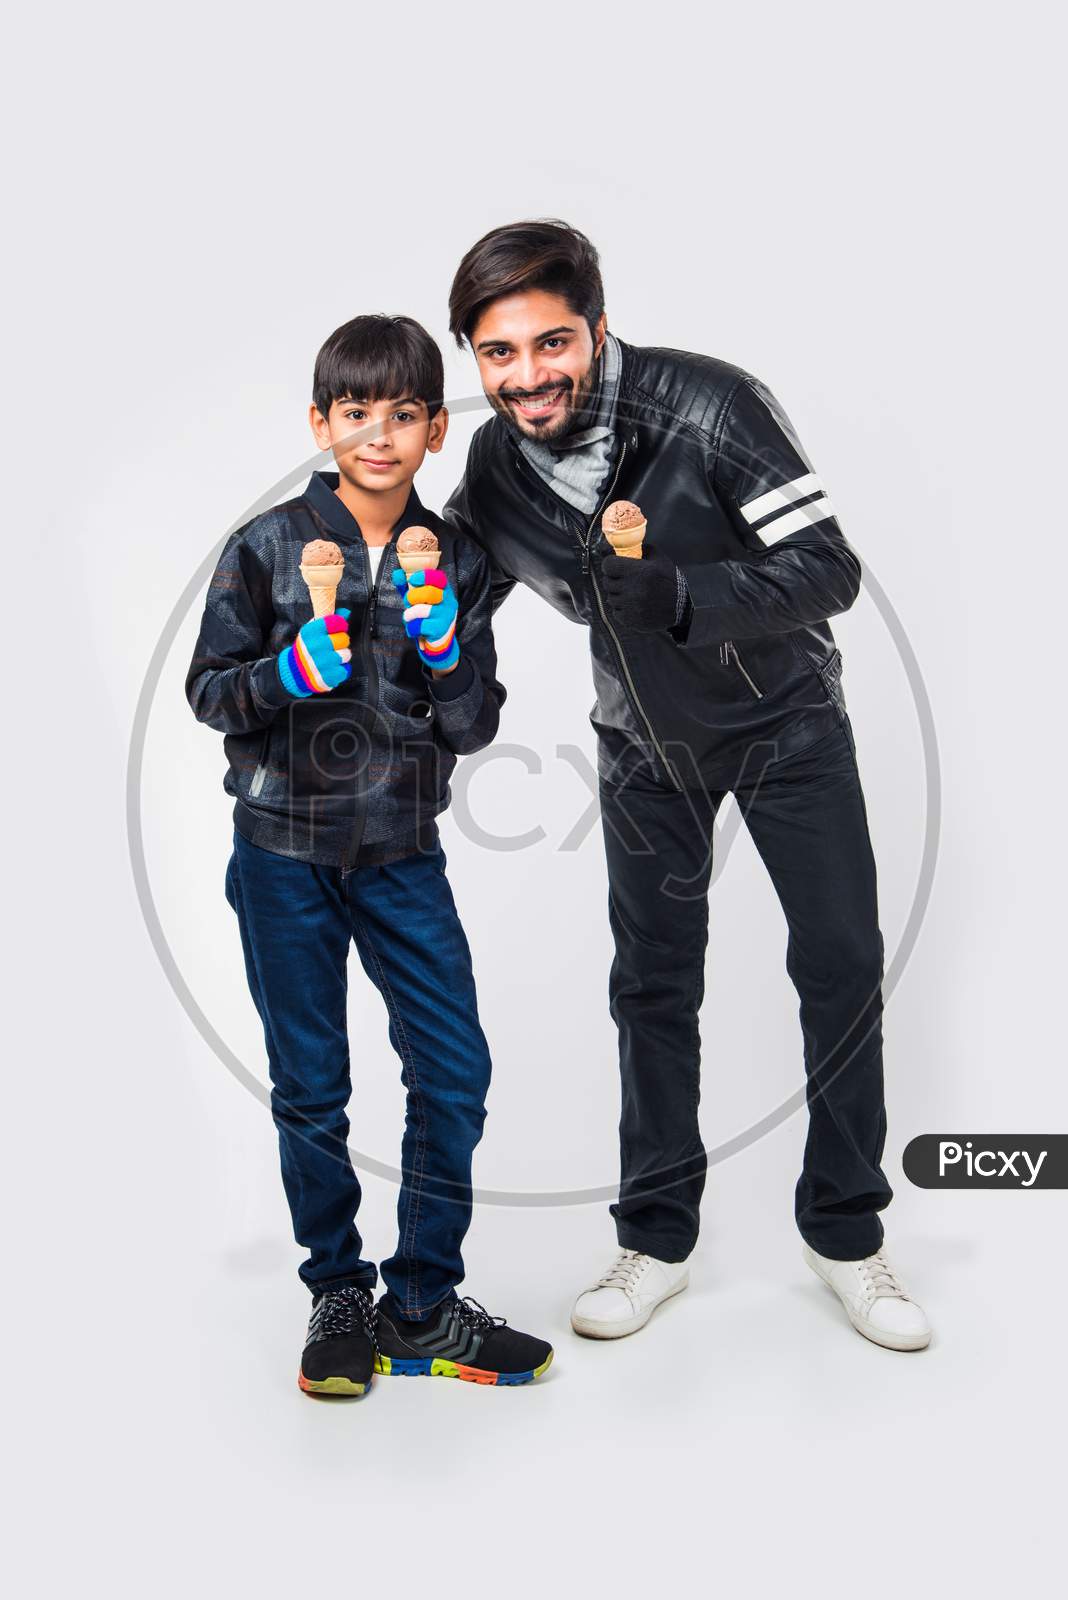 Indian Father and Son eating ice Cream in warm clothes on white background